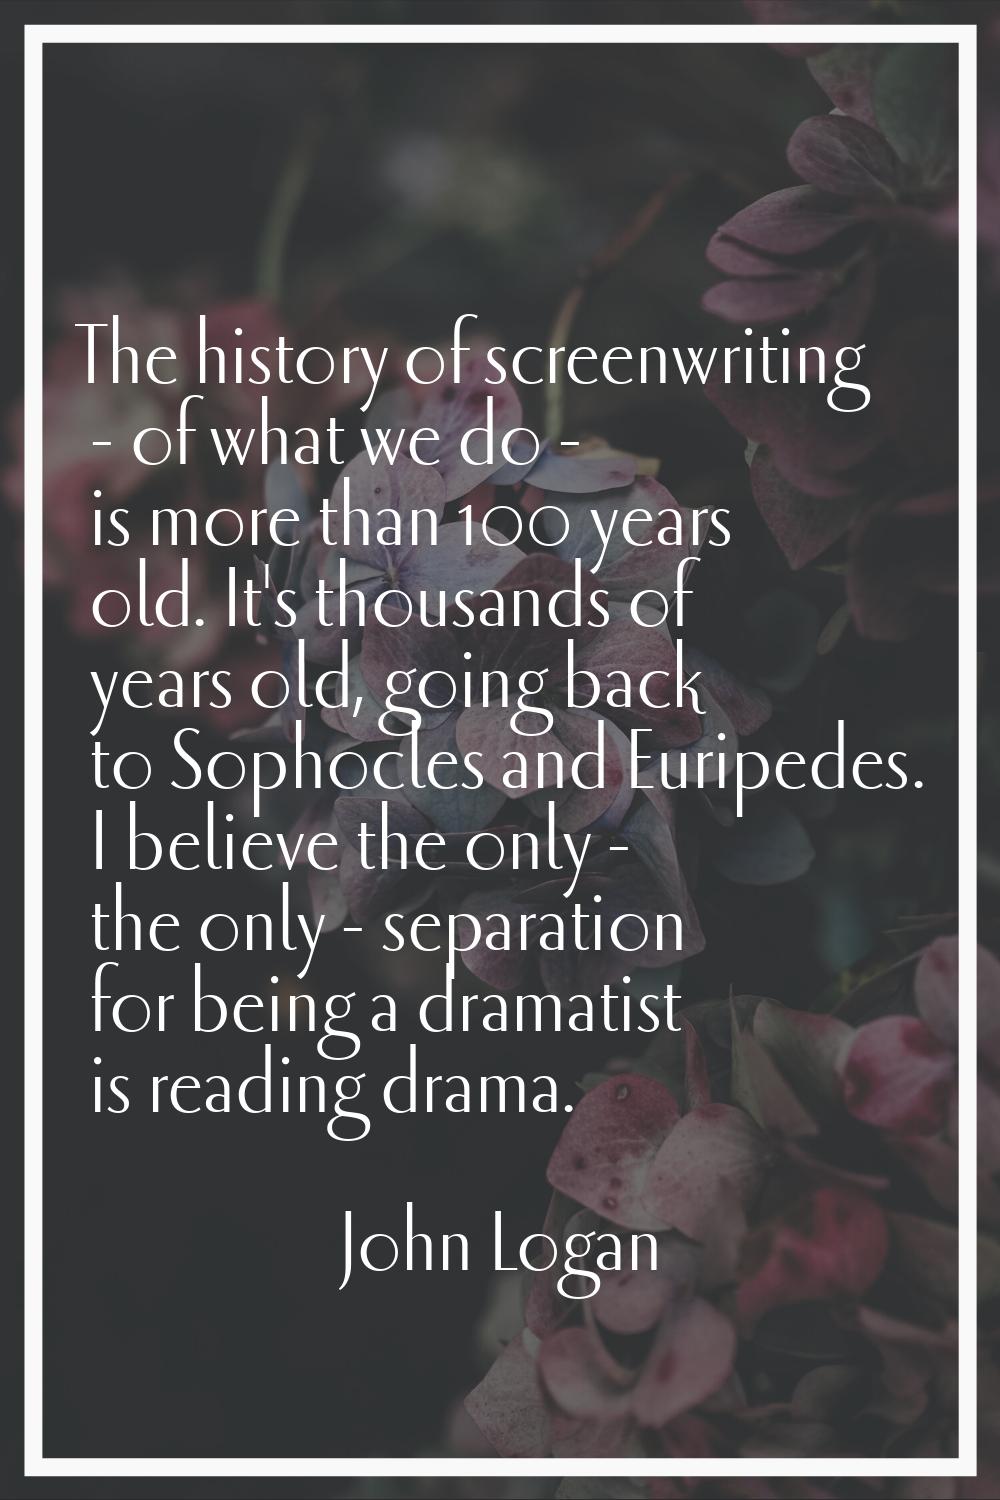 The history of screenwriting - of what we do - is more than 100 years old. It's thousands of years 